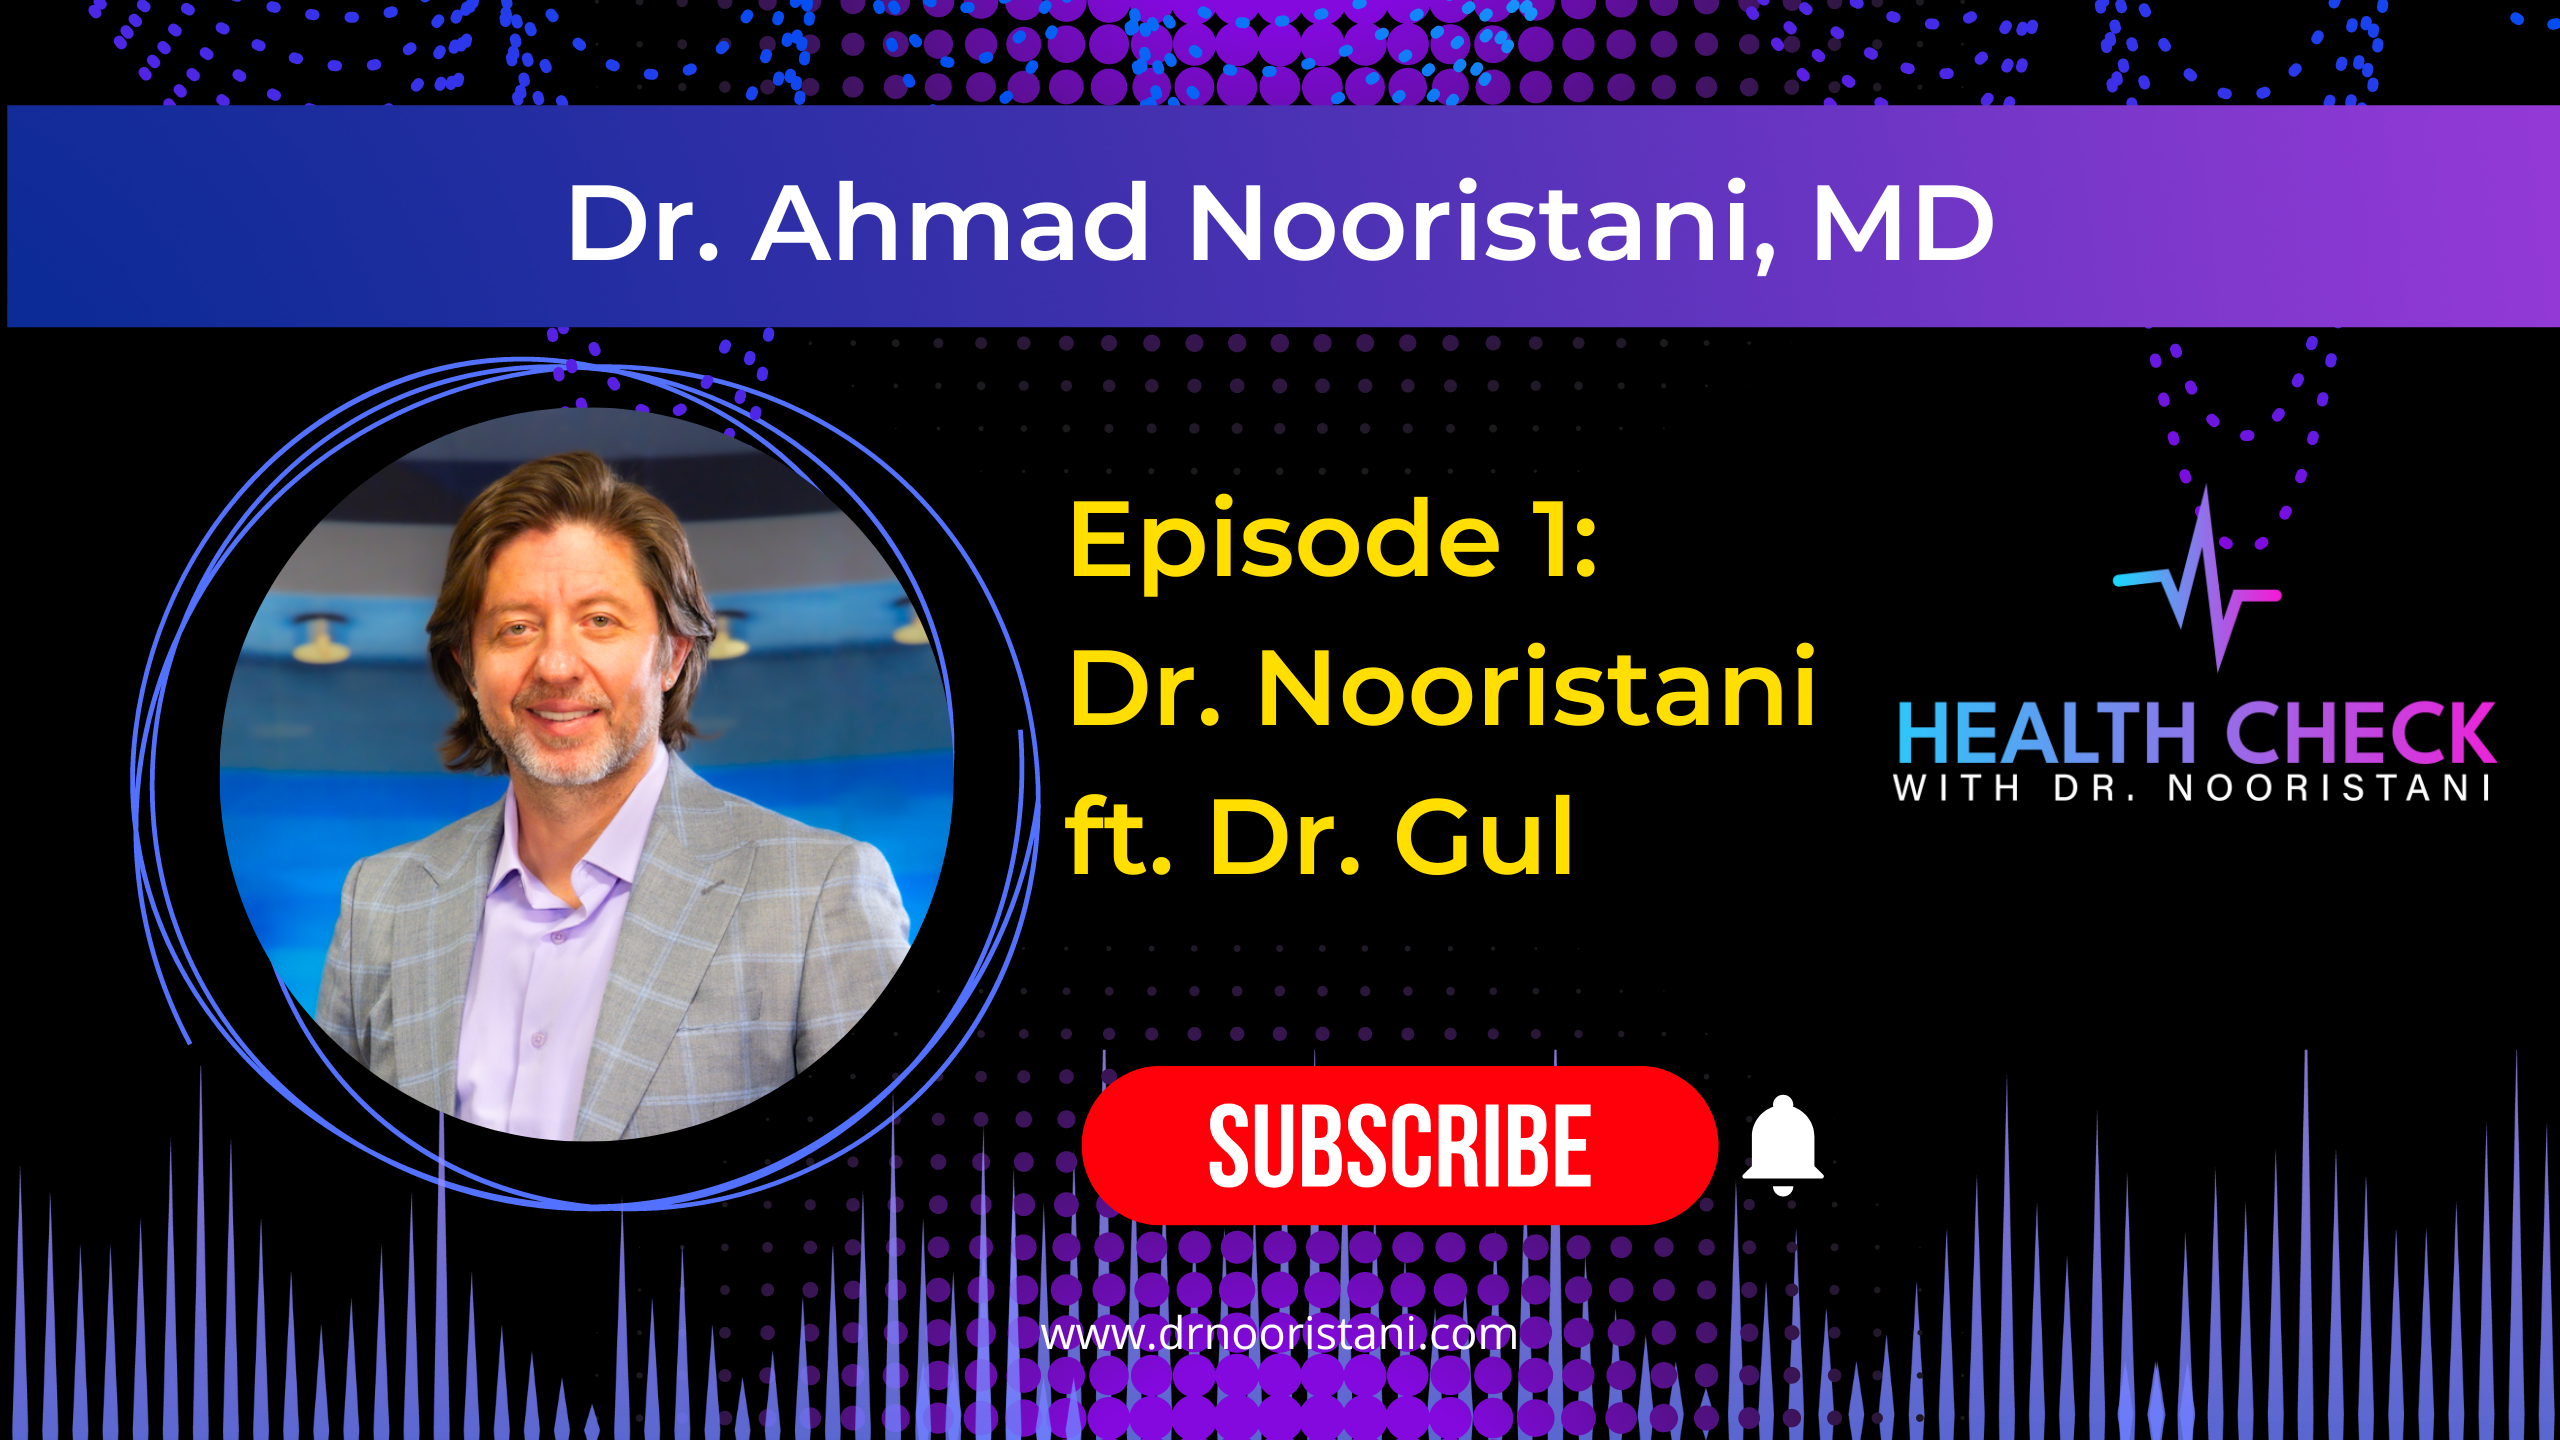 Load video: Health check with dr nooristani yurview